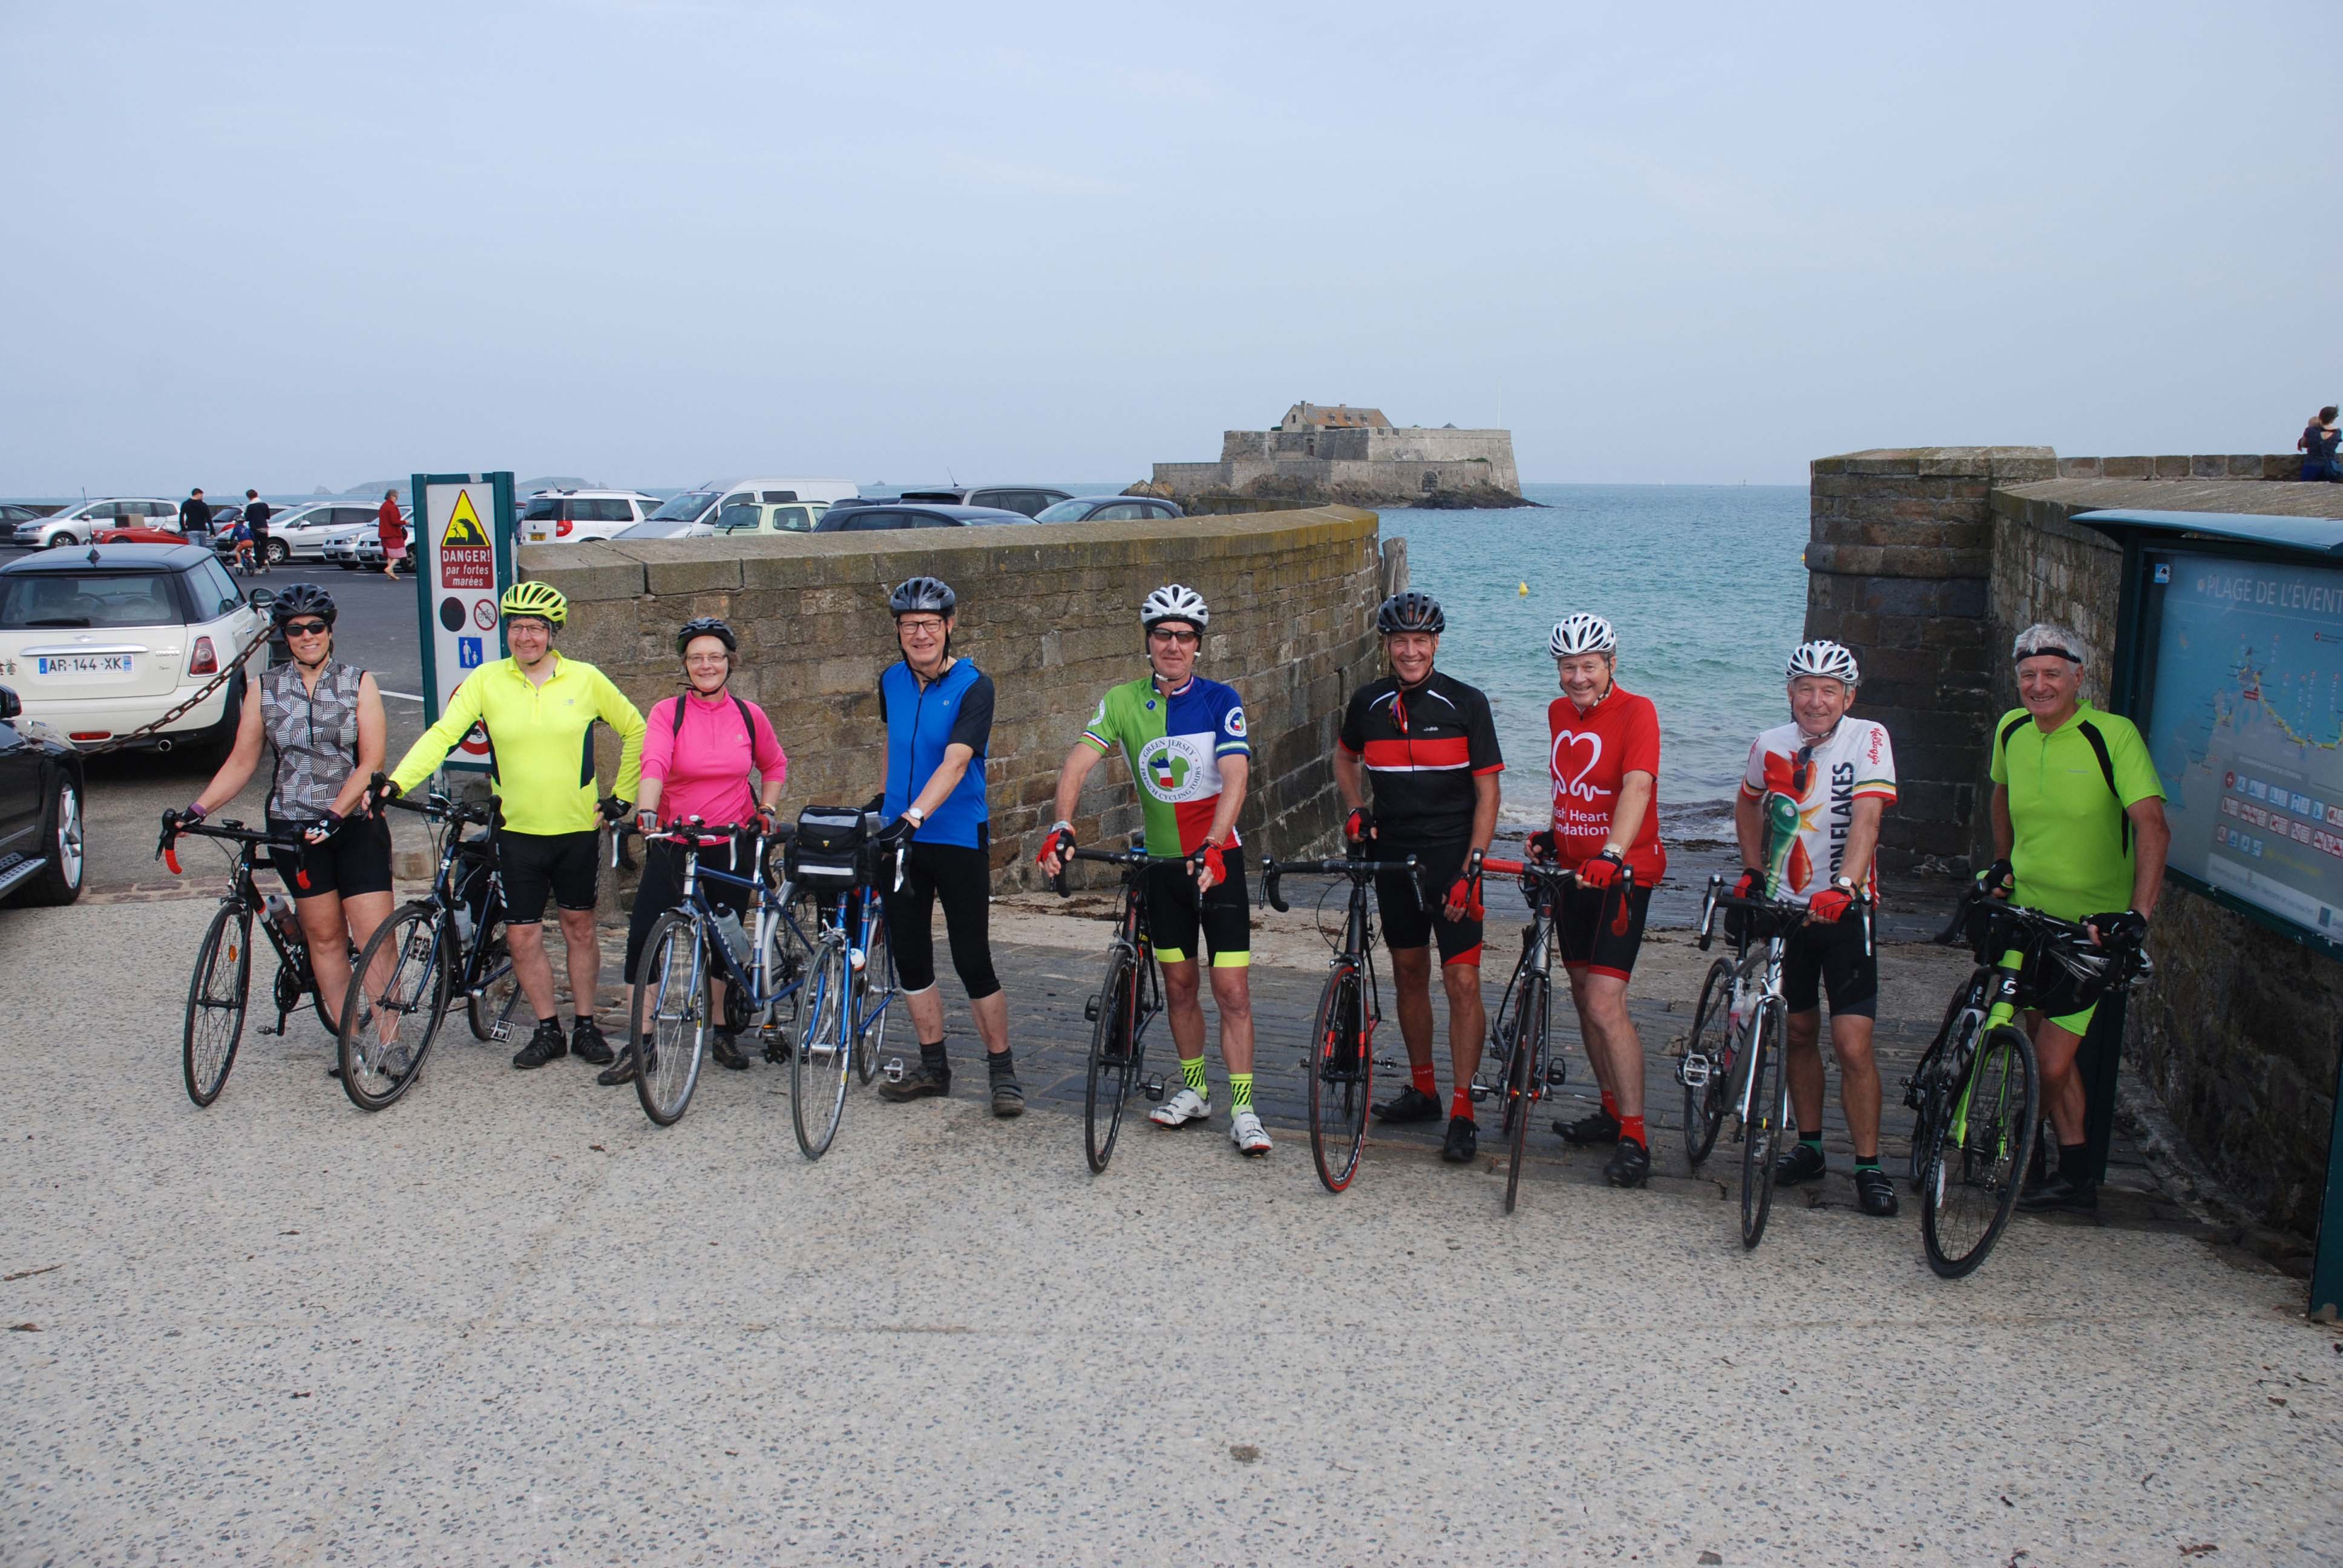 Setting off from St Malo on our cycling tour of Brittany